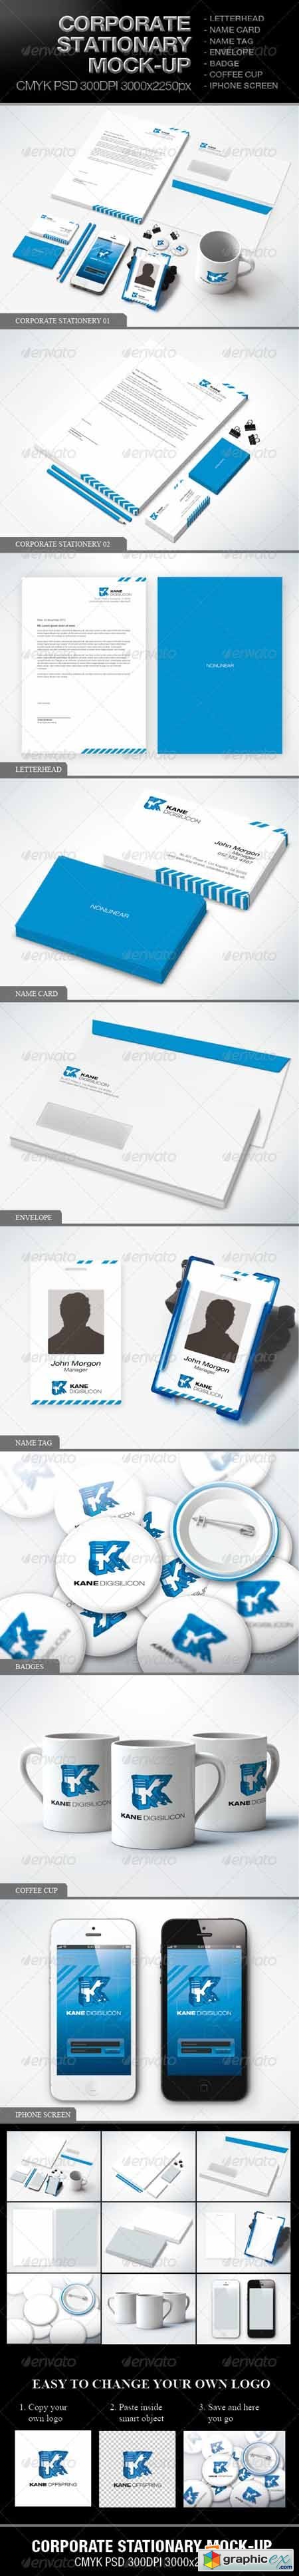 Corporate Stationary Mock-up 3885546